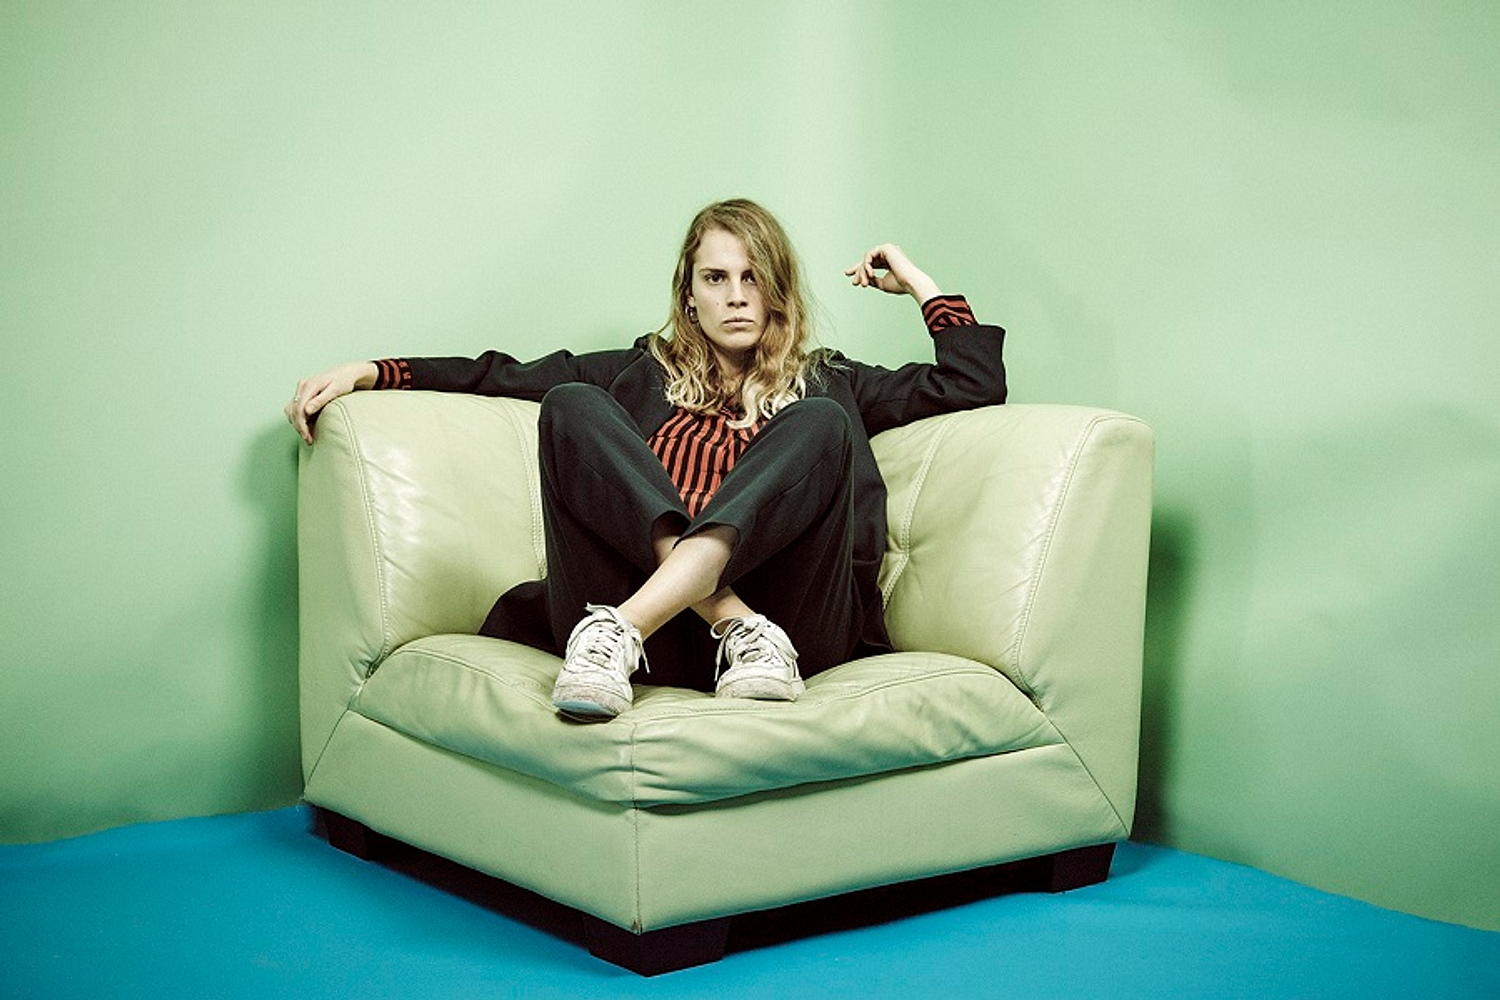 Marika Hackman’s new album looks like it’s called ‘I’m Not Your Man’